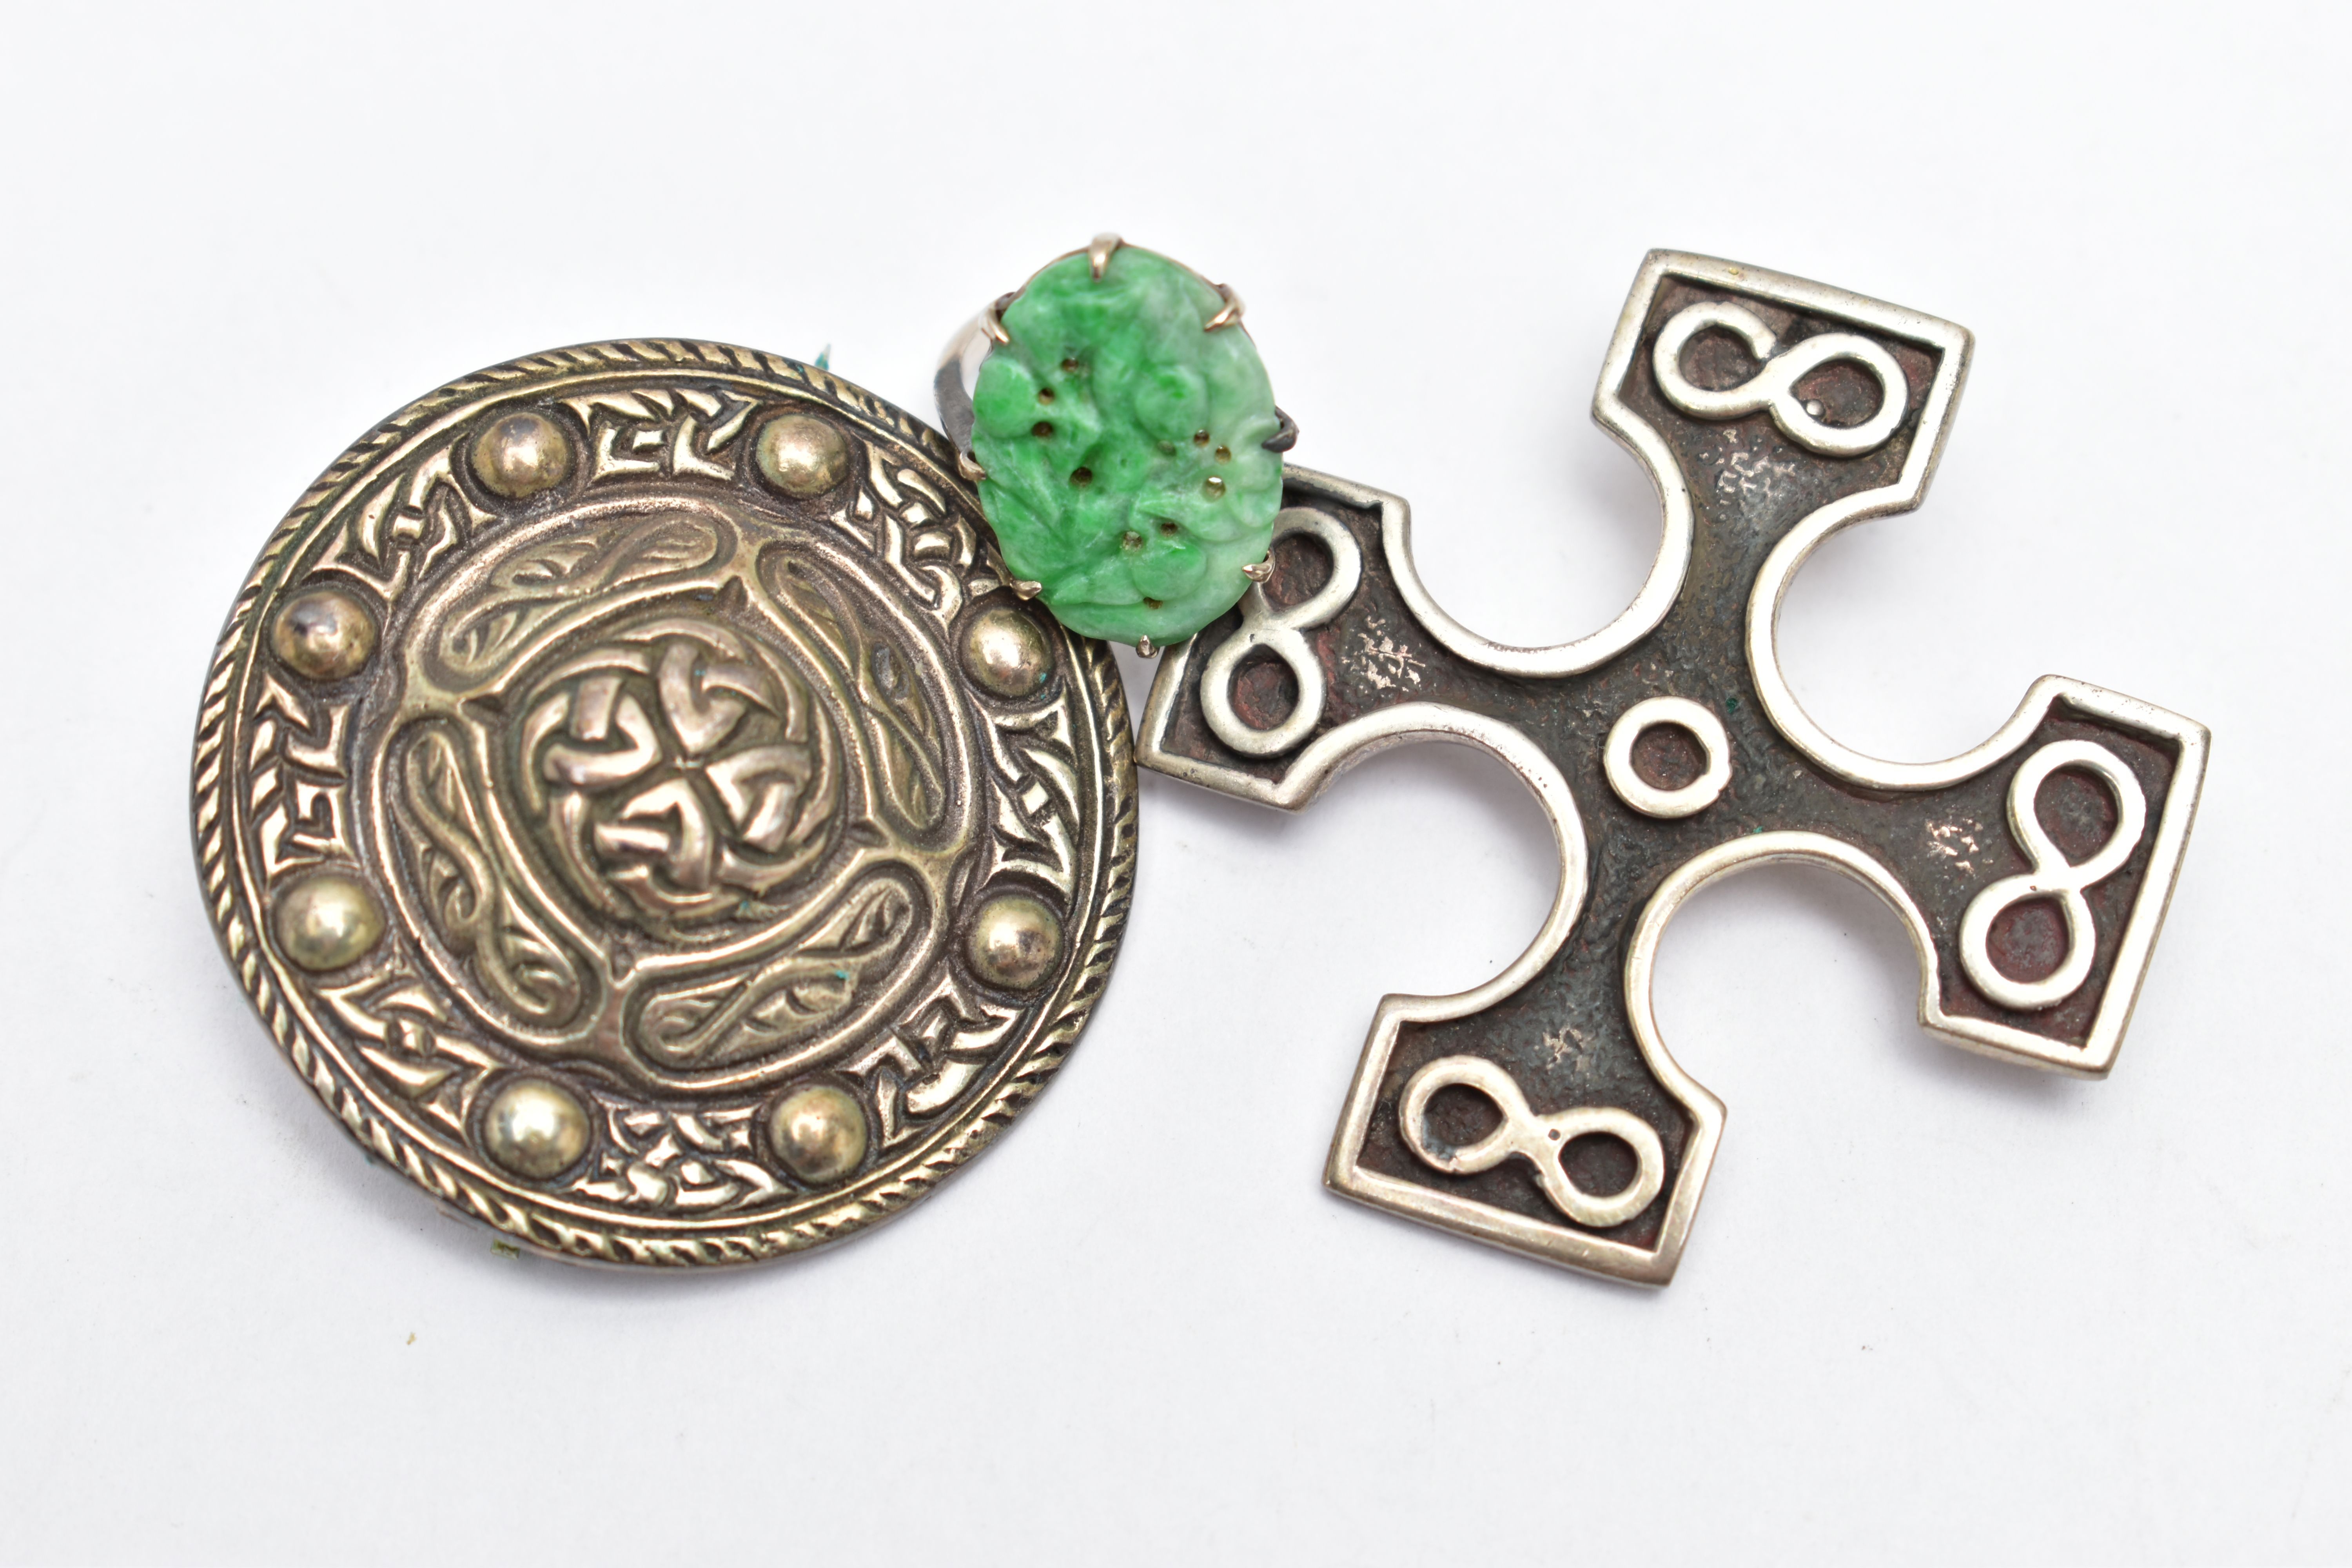 TWO SCOTTISH SILVER BROOCHES, the first a silver cross, detailed with four infinity symbols,